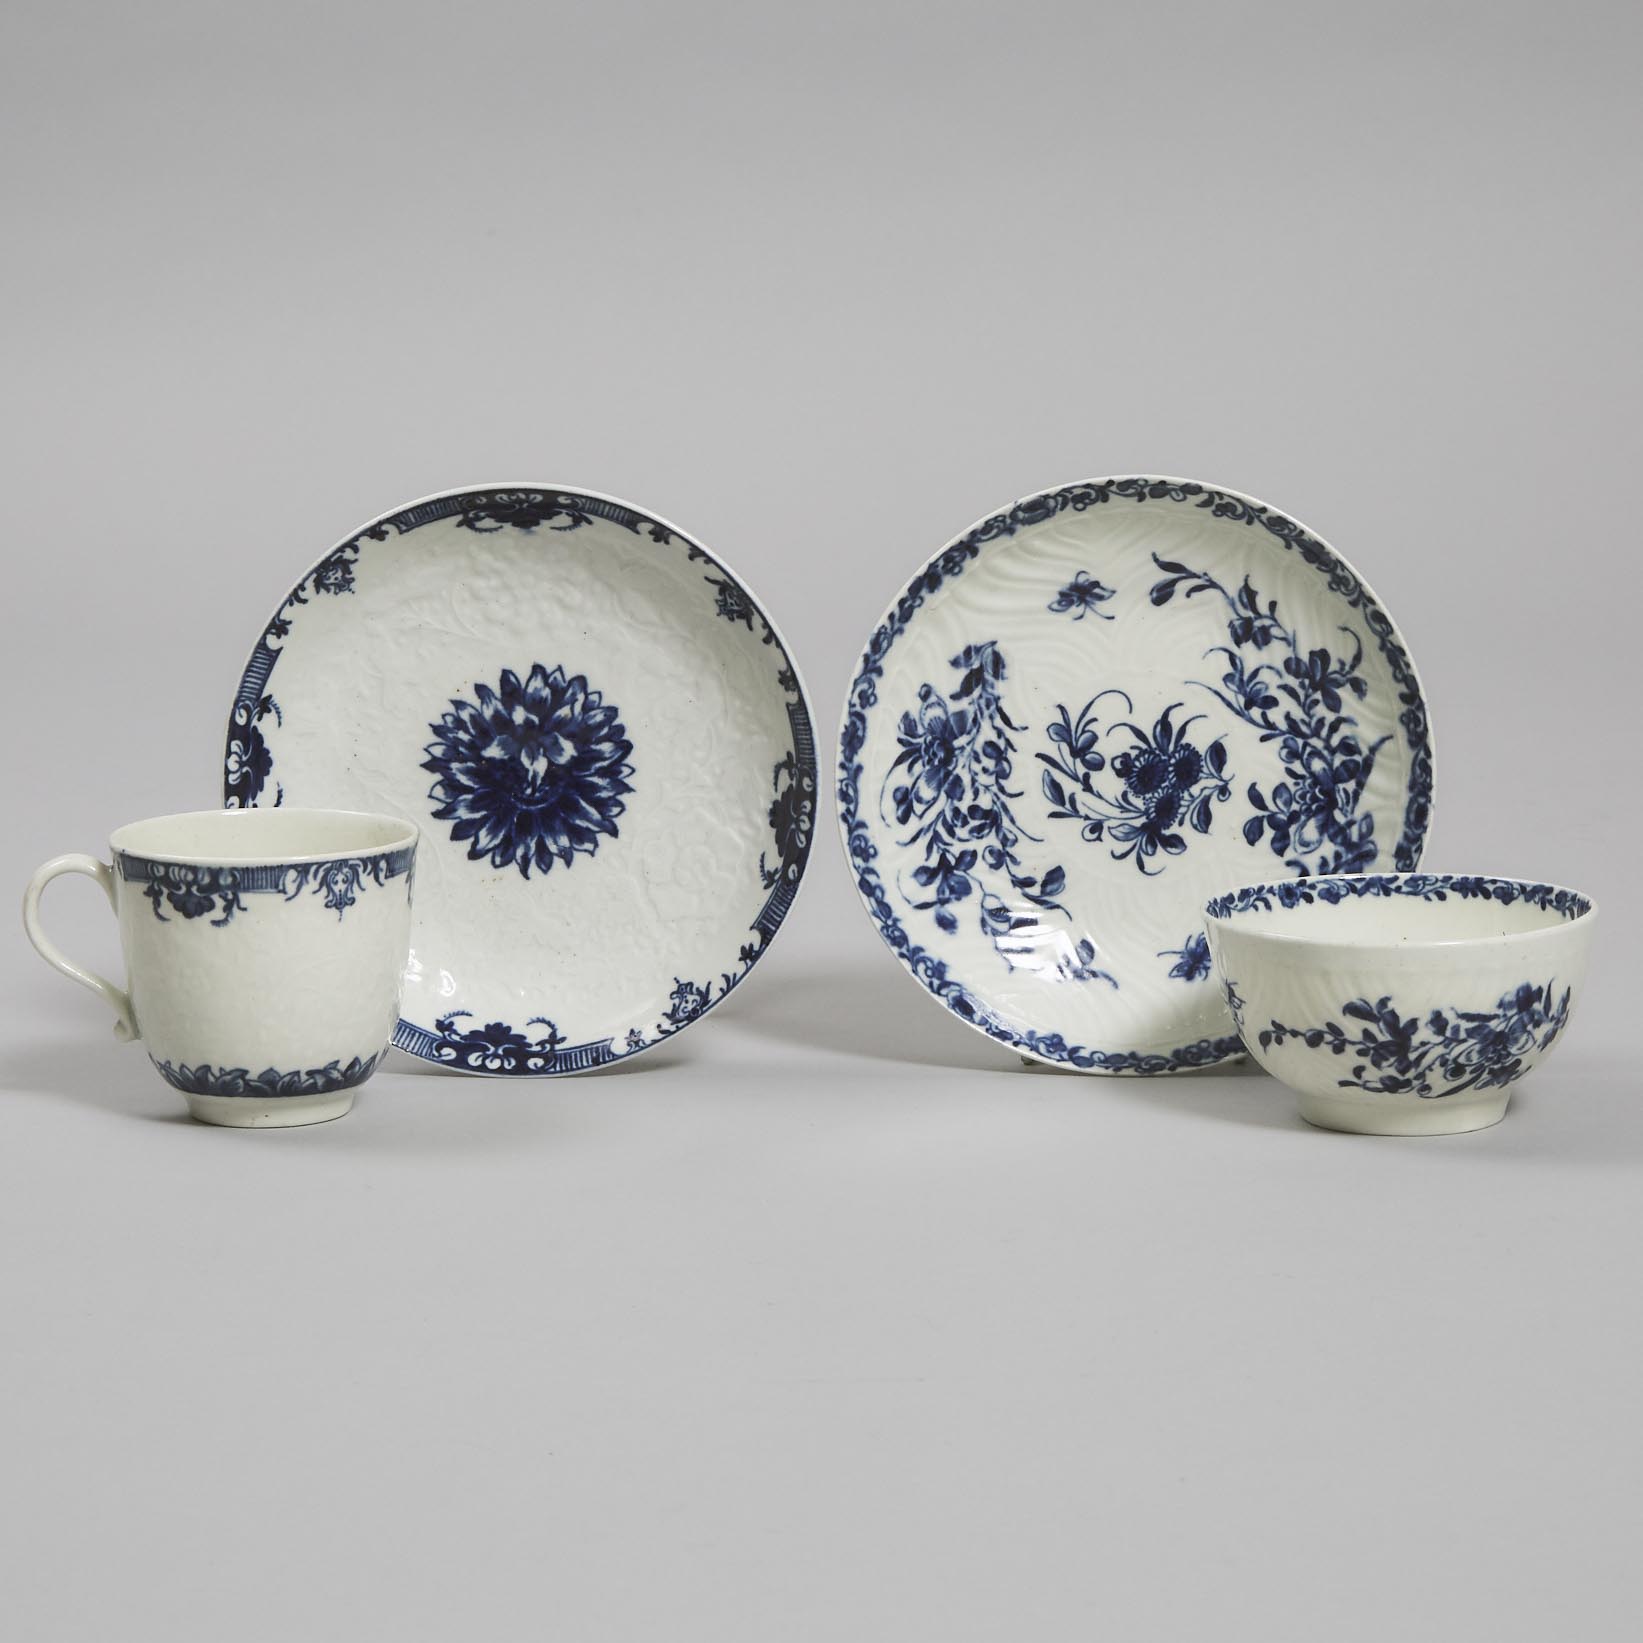 Worcester 'Feather Mould Floral' Tea Bowl and Saucer and a 'Chrysanthemum' Pattern Coffee Cup and Saucer, c.1765-70